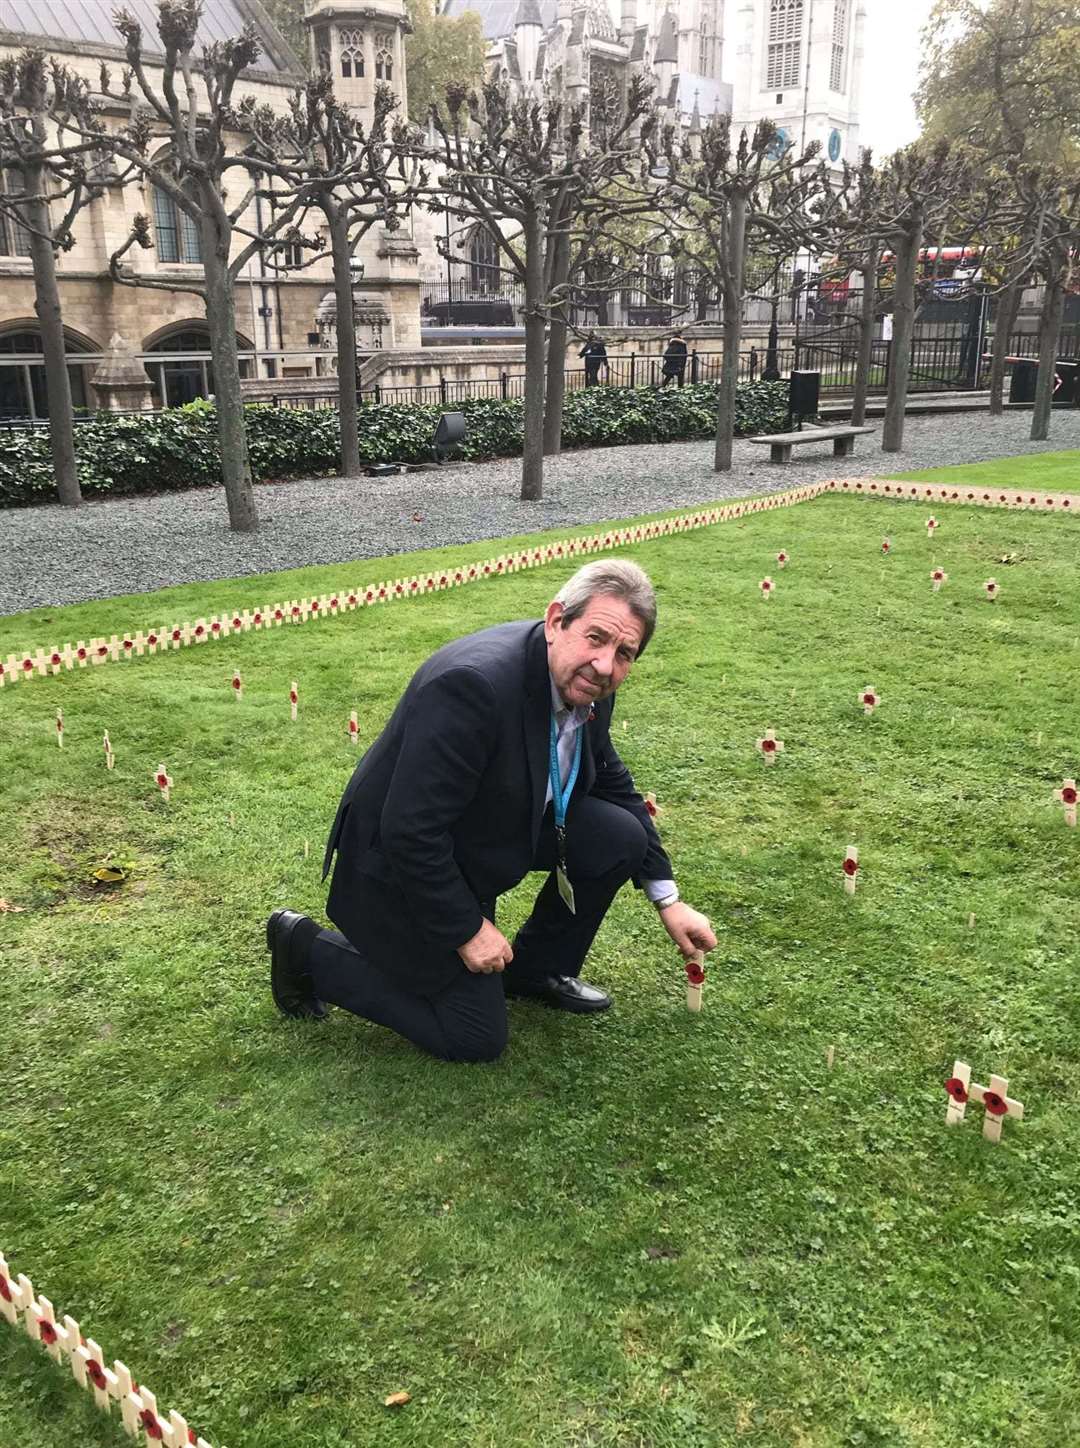 Sittingbourne and Sheppey MP Gordon Henderson planted a poppy cross in the new Constituency Remembrance Garden at the House of Commons